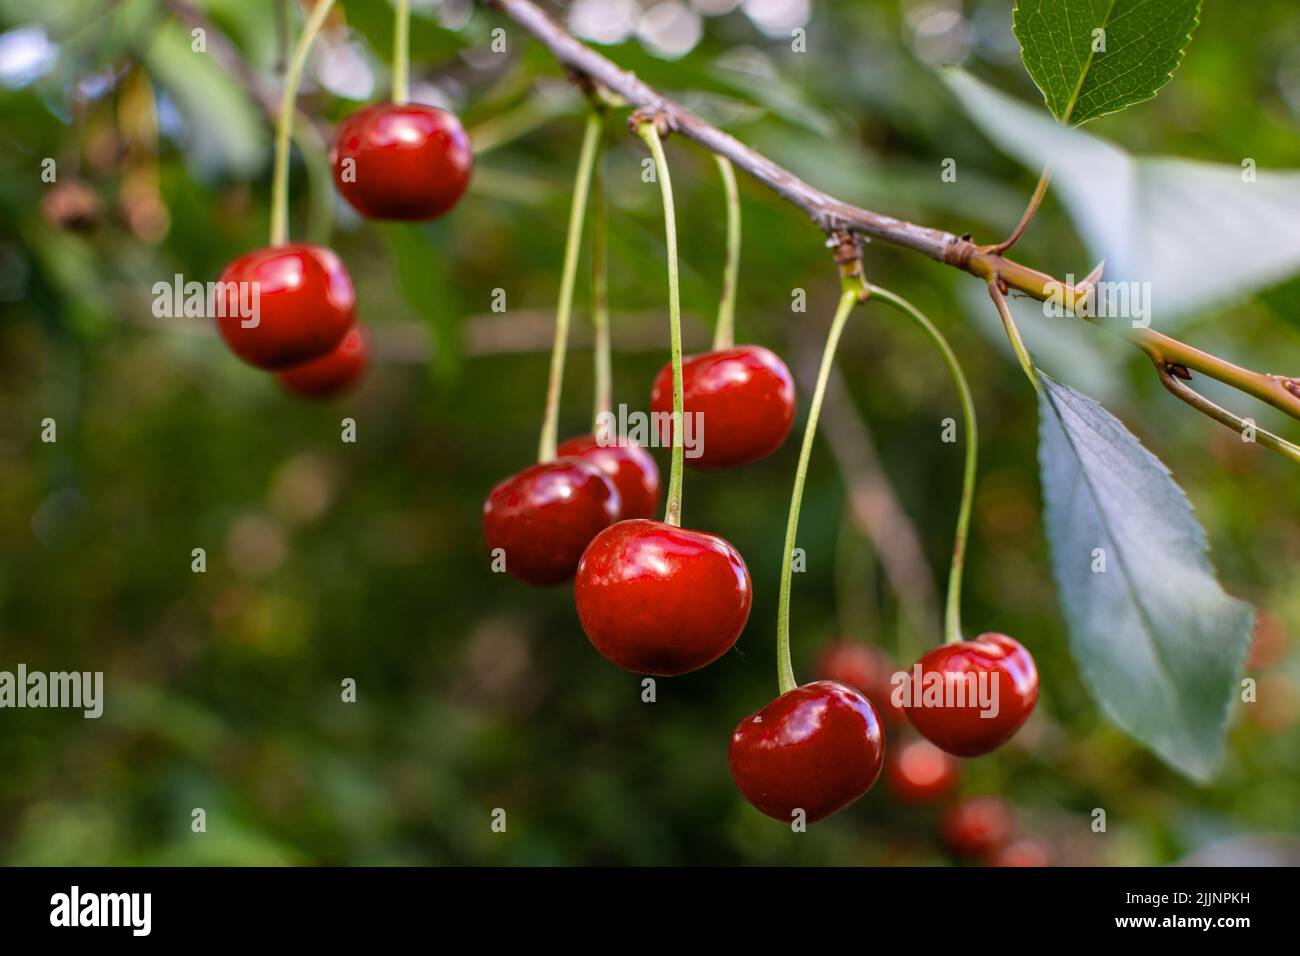 Ripe red cherries on the branch growing in the orchard garden Stock Photo